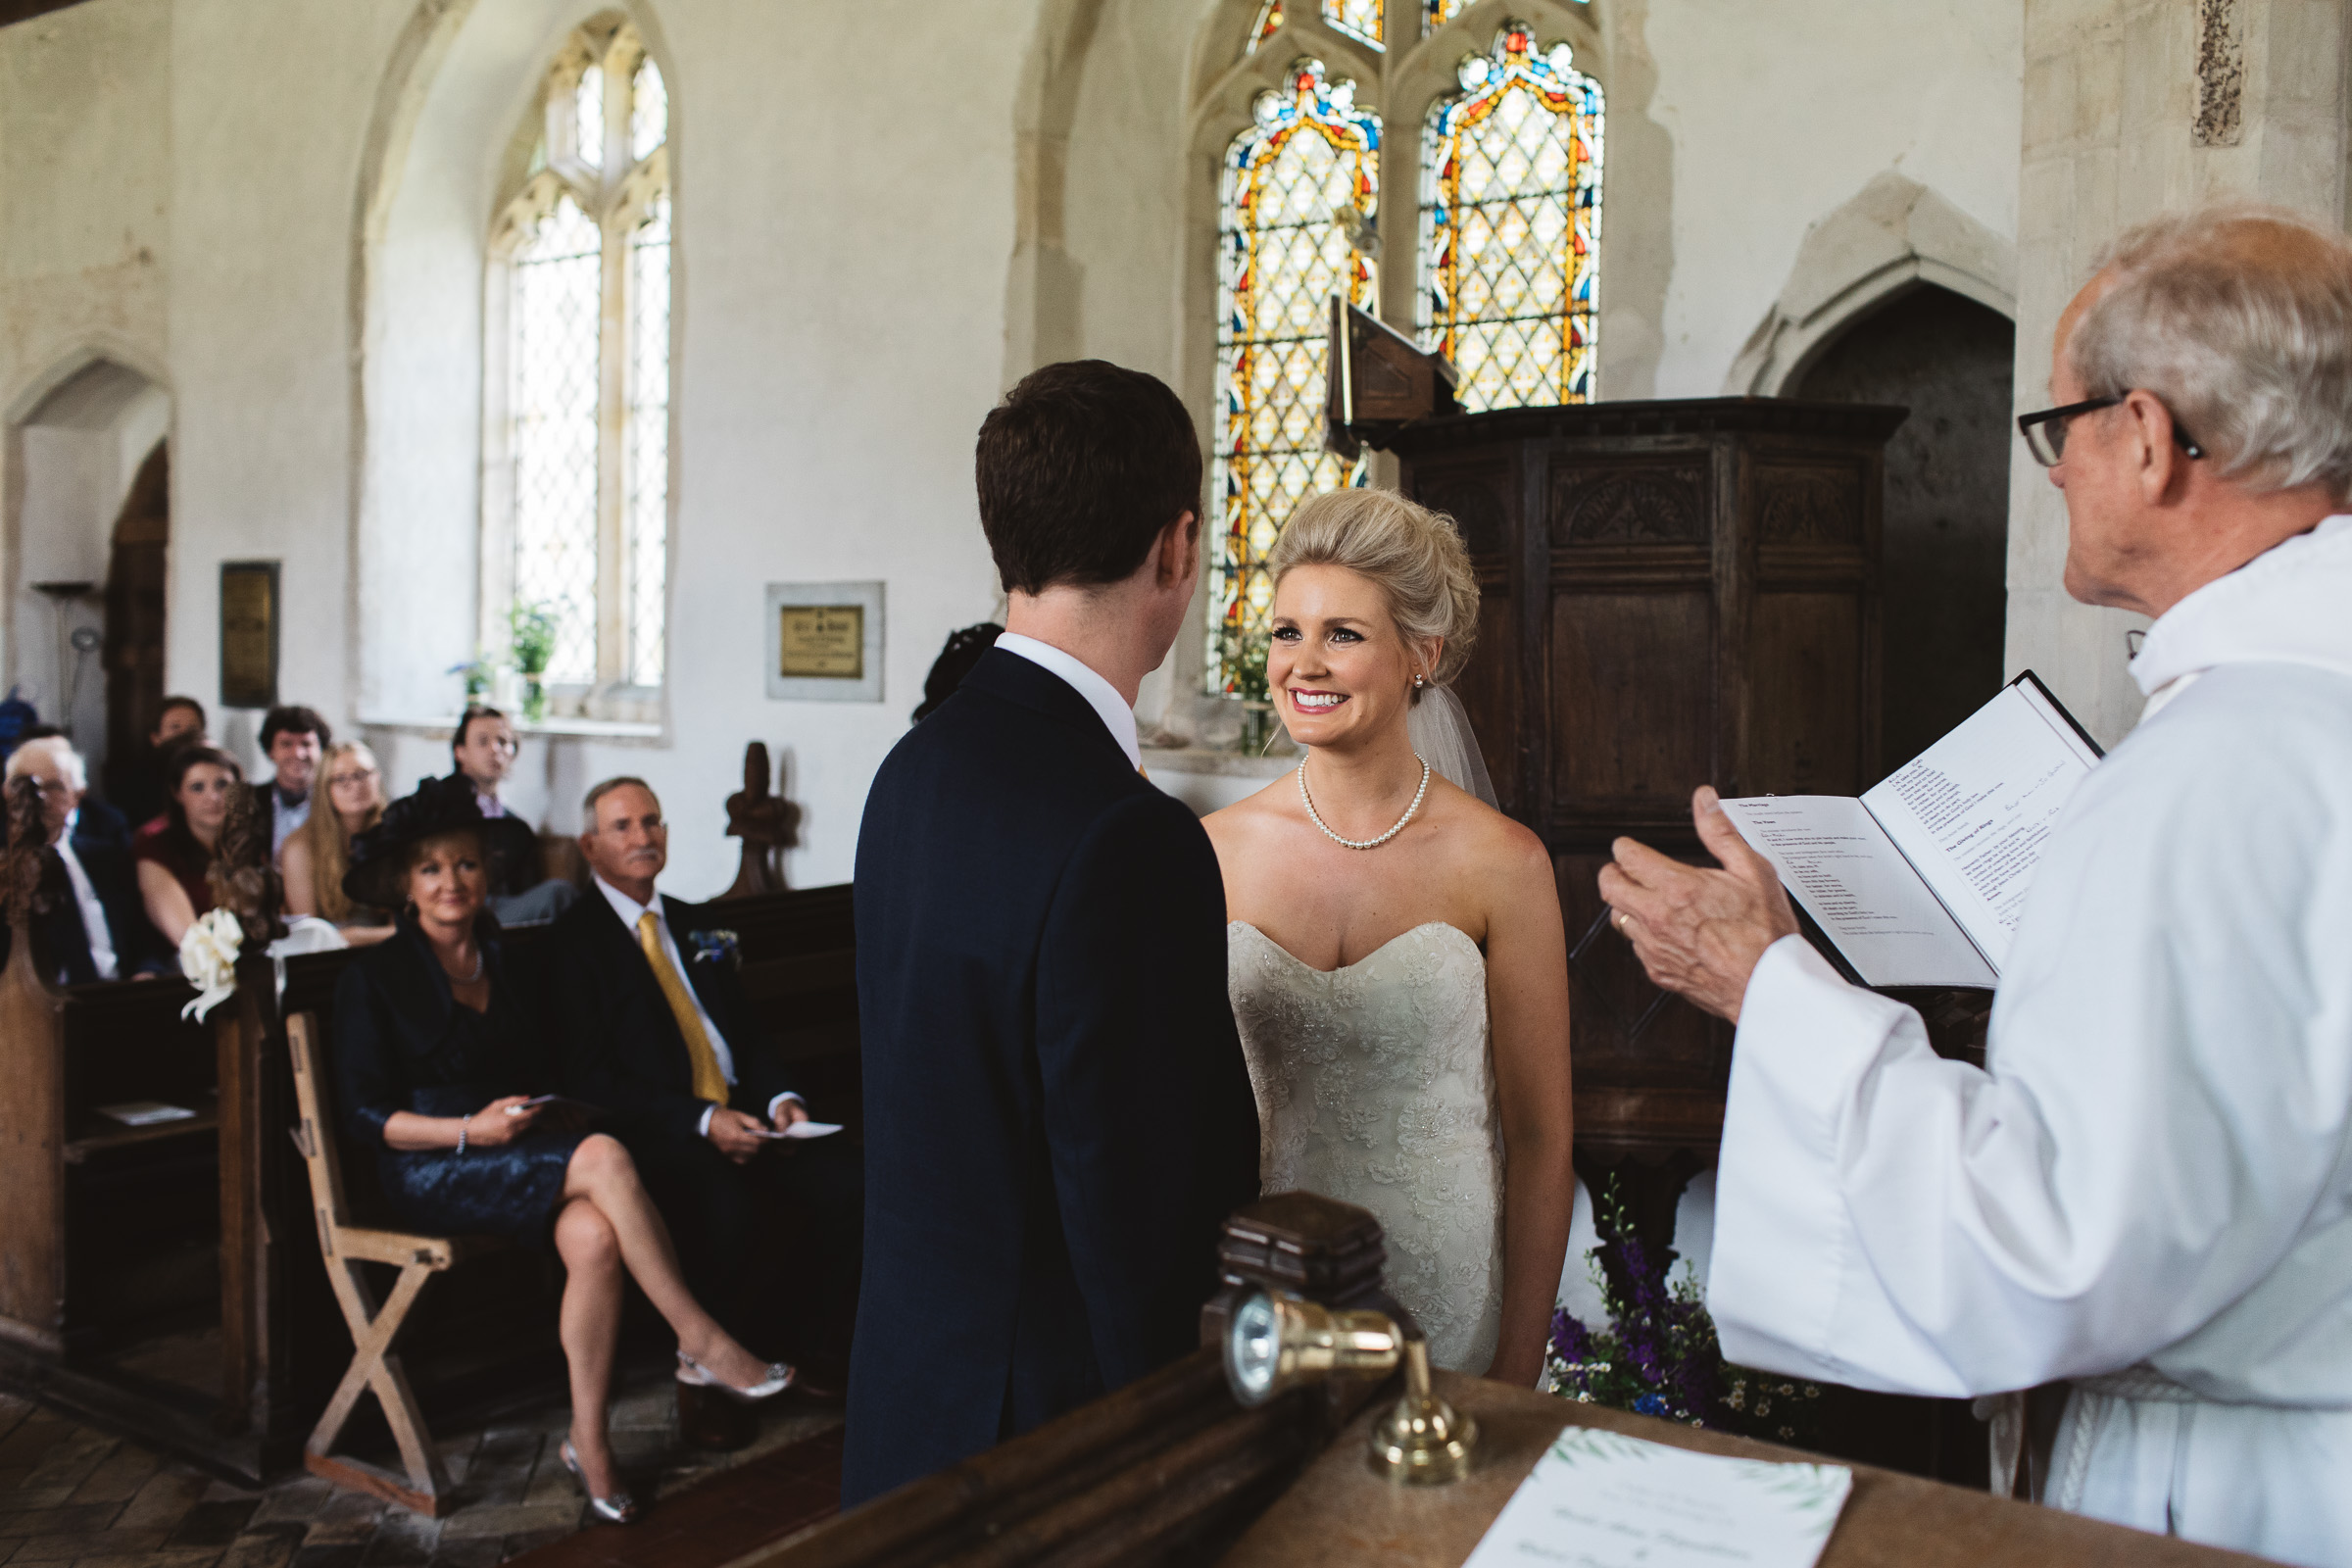 Bride smiling at groom during wedding ceremony at St Peter & St Paul's Church in Alpheton